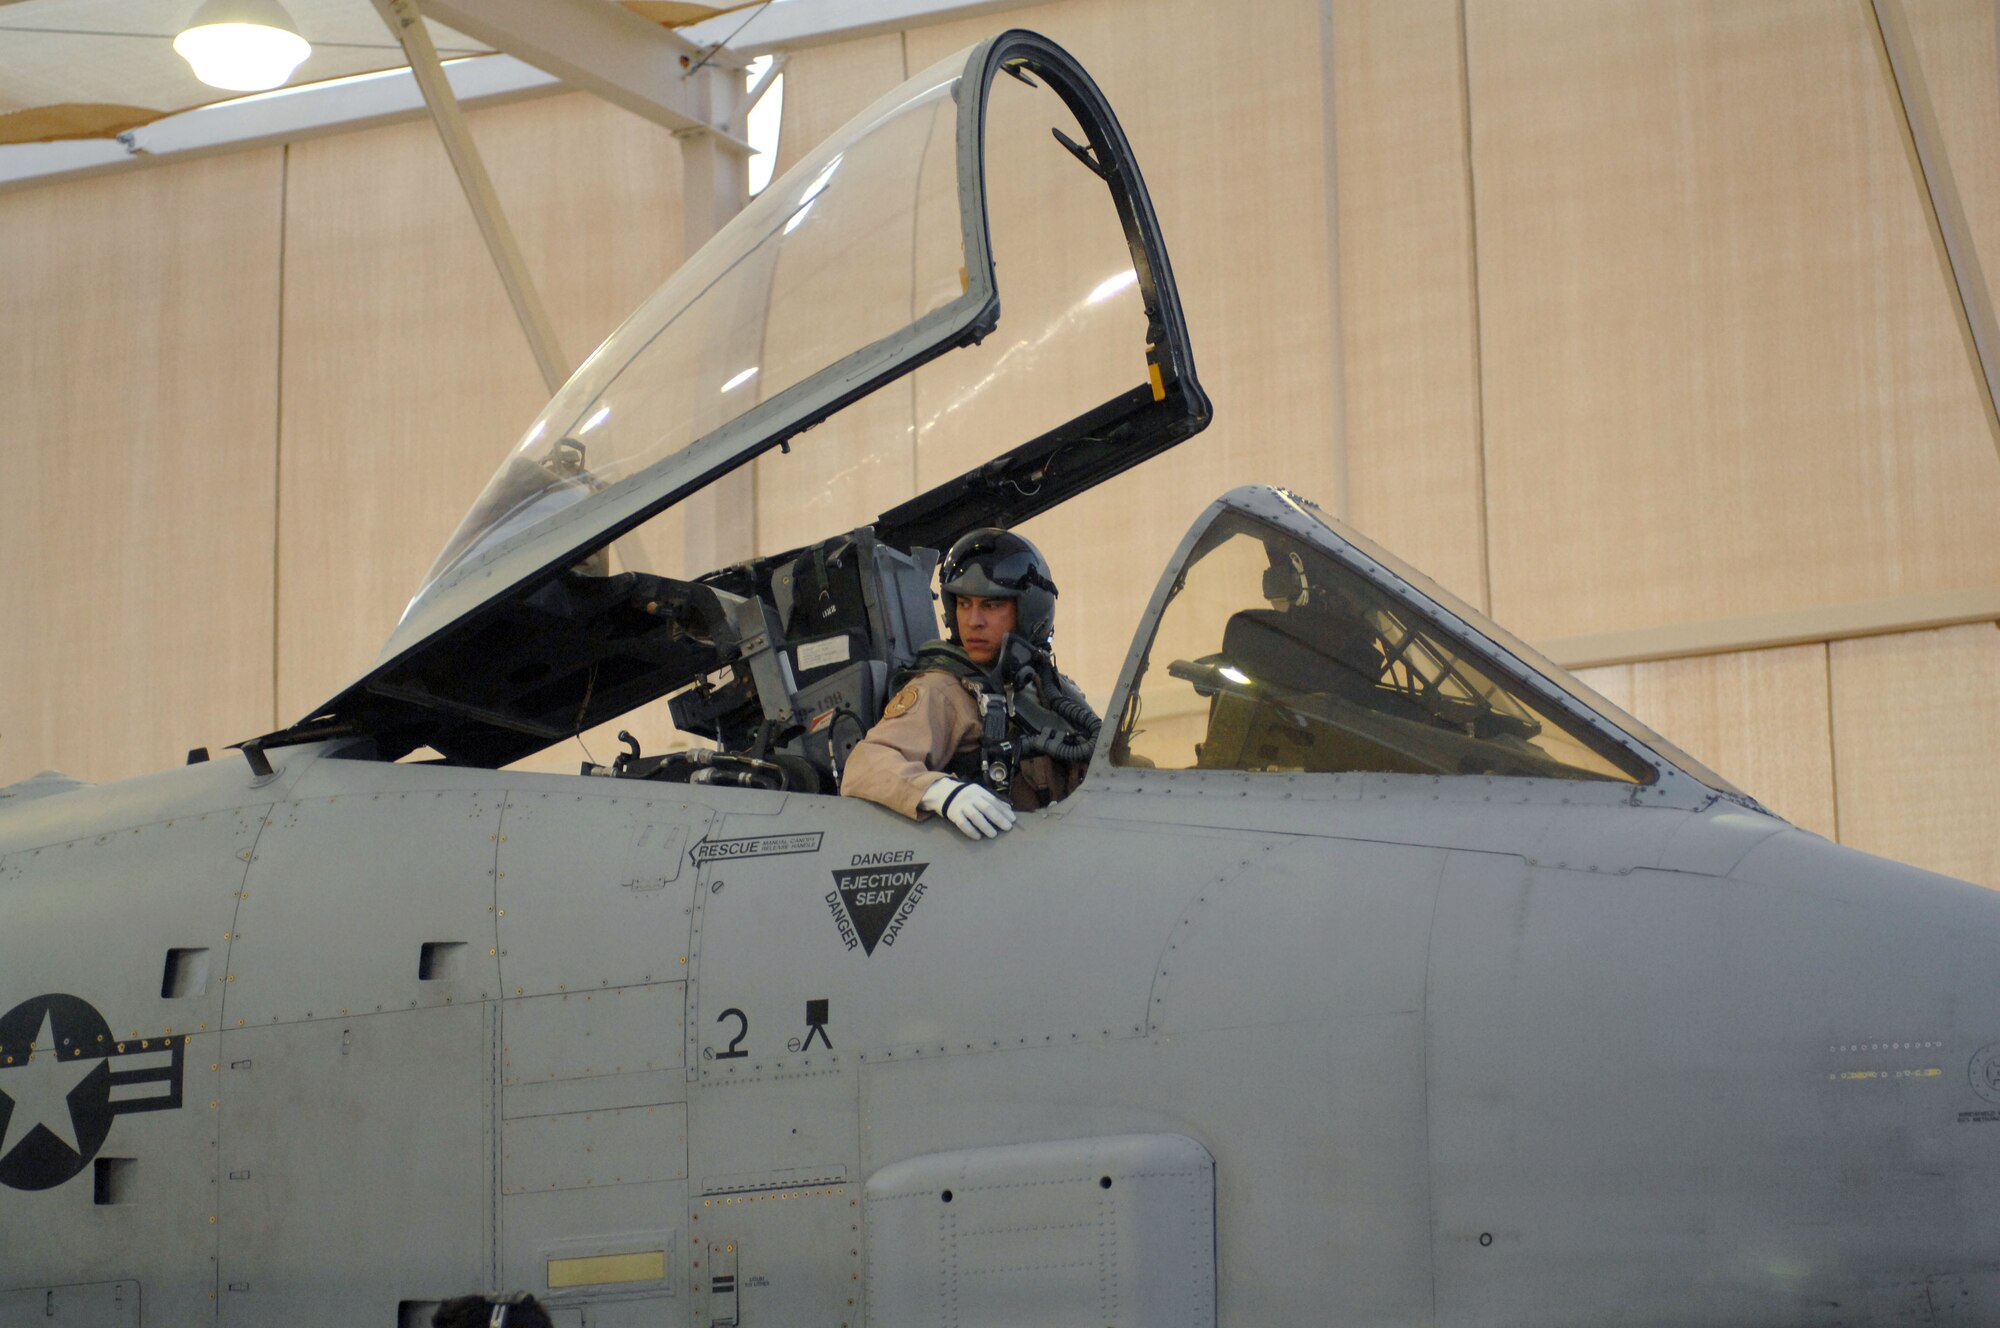 U. S. Air Force Maj. Andrew Tenenbaum, 354th Fighter Squadron, watches his crew chief go through the final pre-flight checks before he taxis down the flightline at Davis-Monthan Air Force Base, Ariz., Sept. 26, 2012. Major Tenenbaum is one of 400 members who deployed to Bagram Airfield, Afghanistan to support the 455th Air Expeditionary Wing, which serves U.S. Air Forces Central and provides close air support, combat search rescue, aerial intelligence, surveillance and reconnaissance, and airlift capabilities to U.S. and coalition forces supporting Operation Enduring Freedom. (U. S. Air Force photo by Airman 1st Class Saphfire Cook)